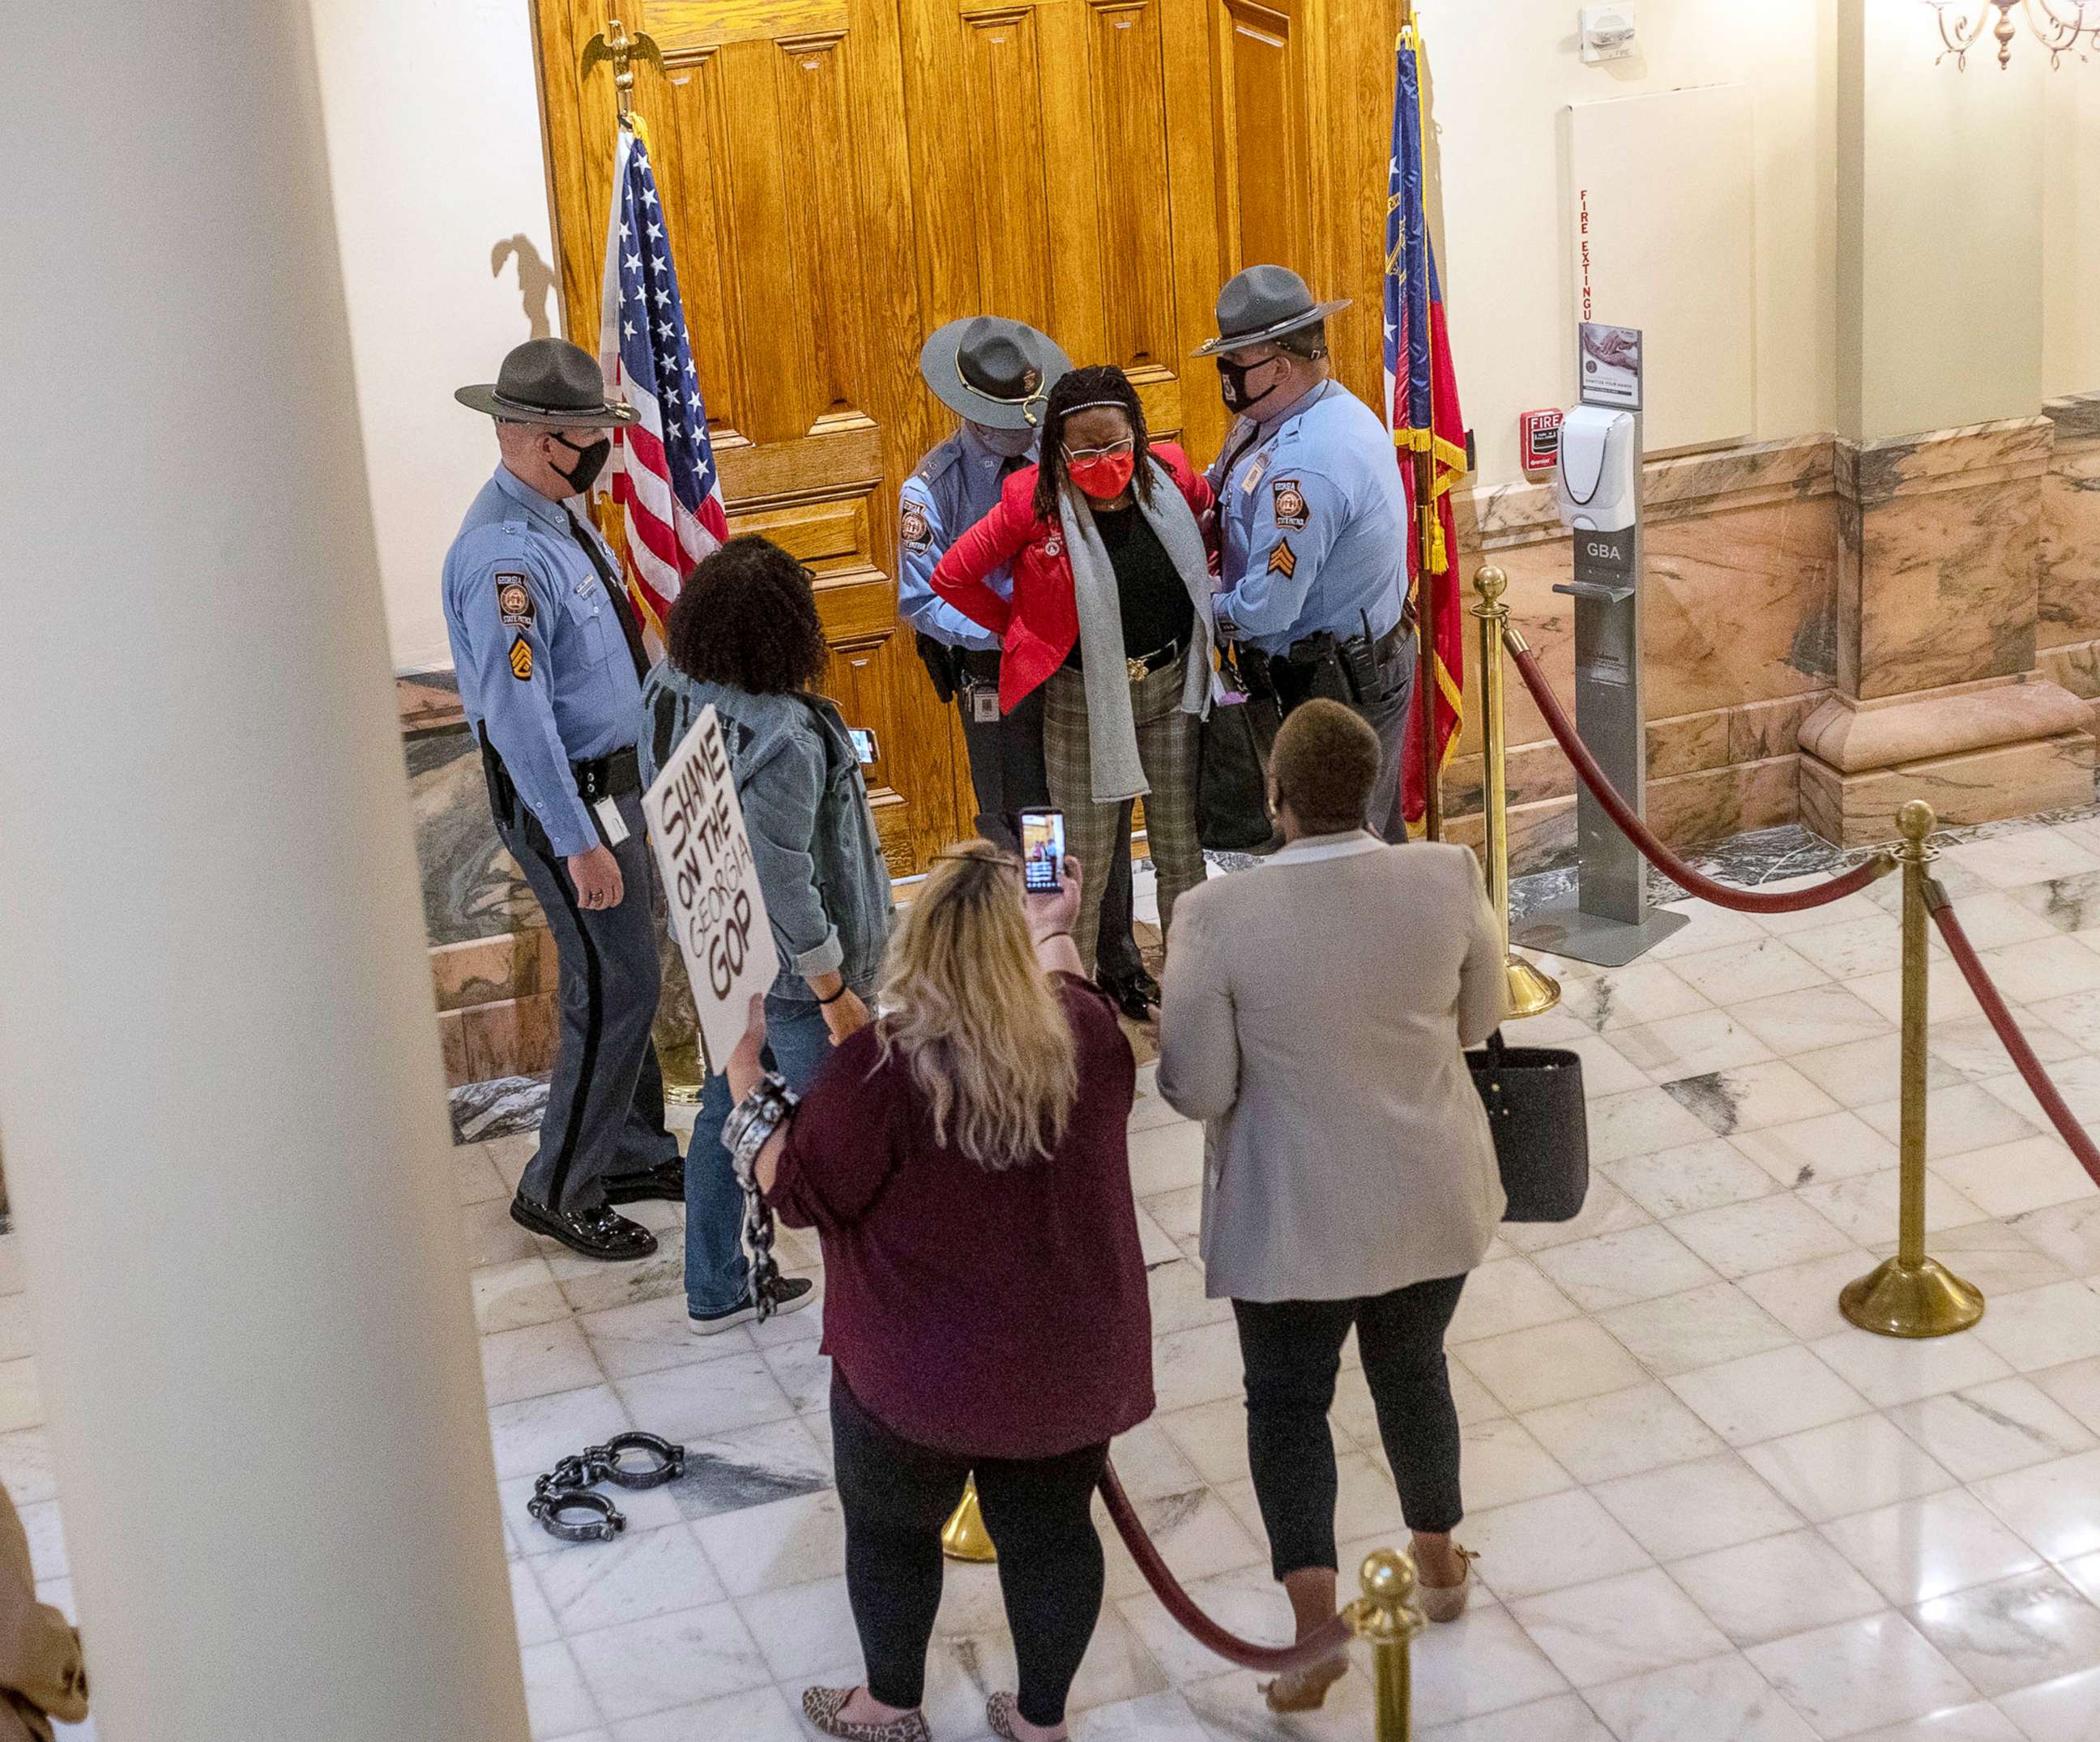 PHOTO: Rep. Park Cannon is placed in handcuffs by Georgia State Troopers after being asked to stop knocking on a door that leads to Gov. Brian Kemp's office while Gov. Kemp was signing SB 202 in the Ga. State Capitol Building in Atlanta, March 25, 2021.